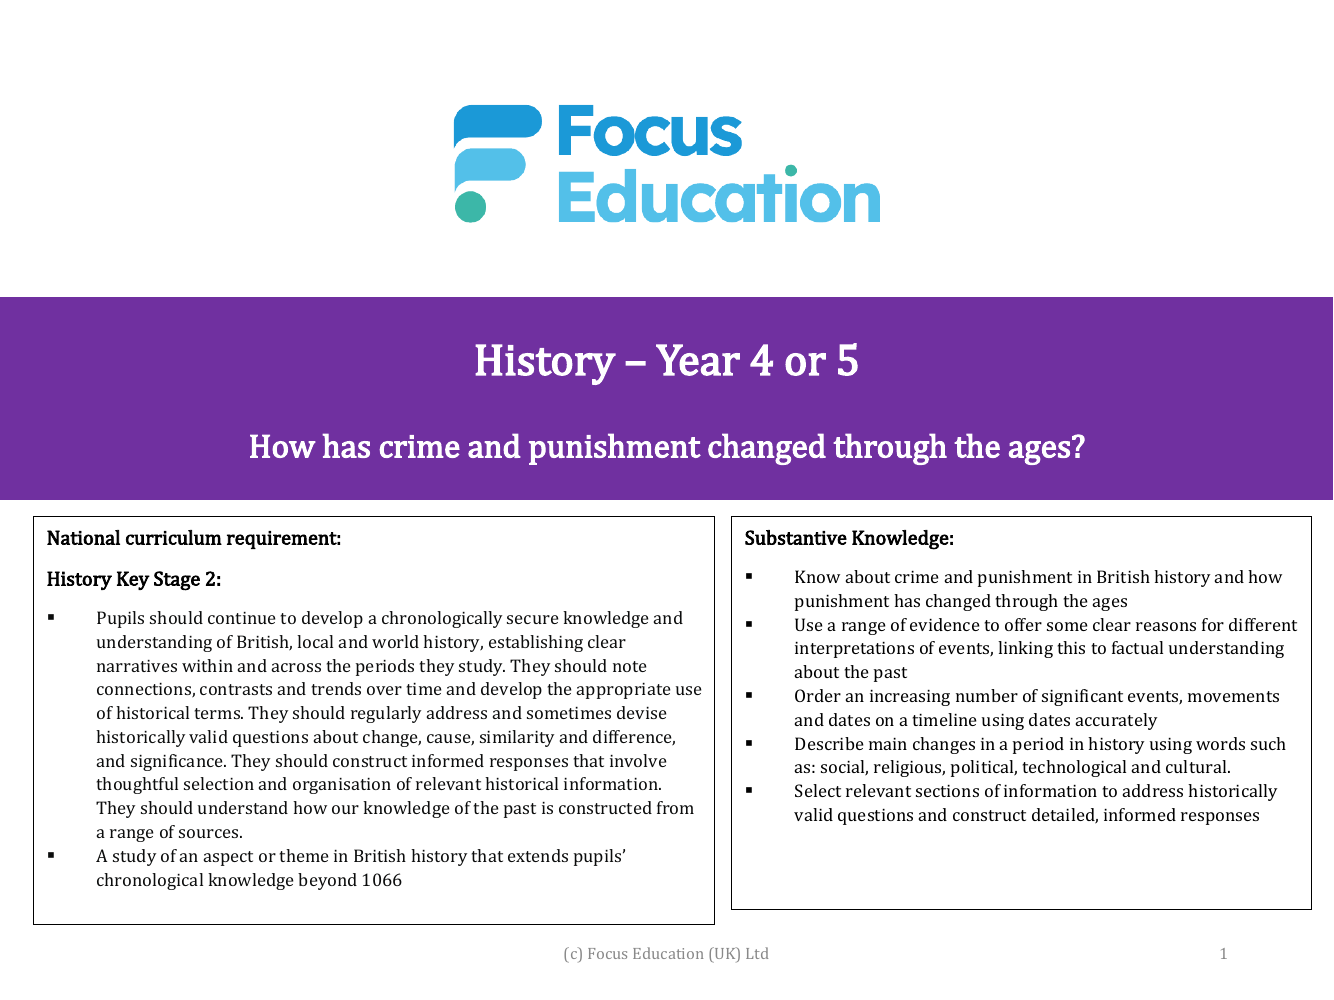 How has crime and punishment changed through the ages? - Introductory Presentation